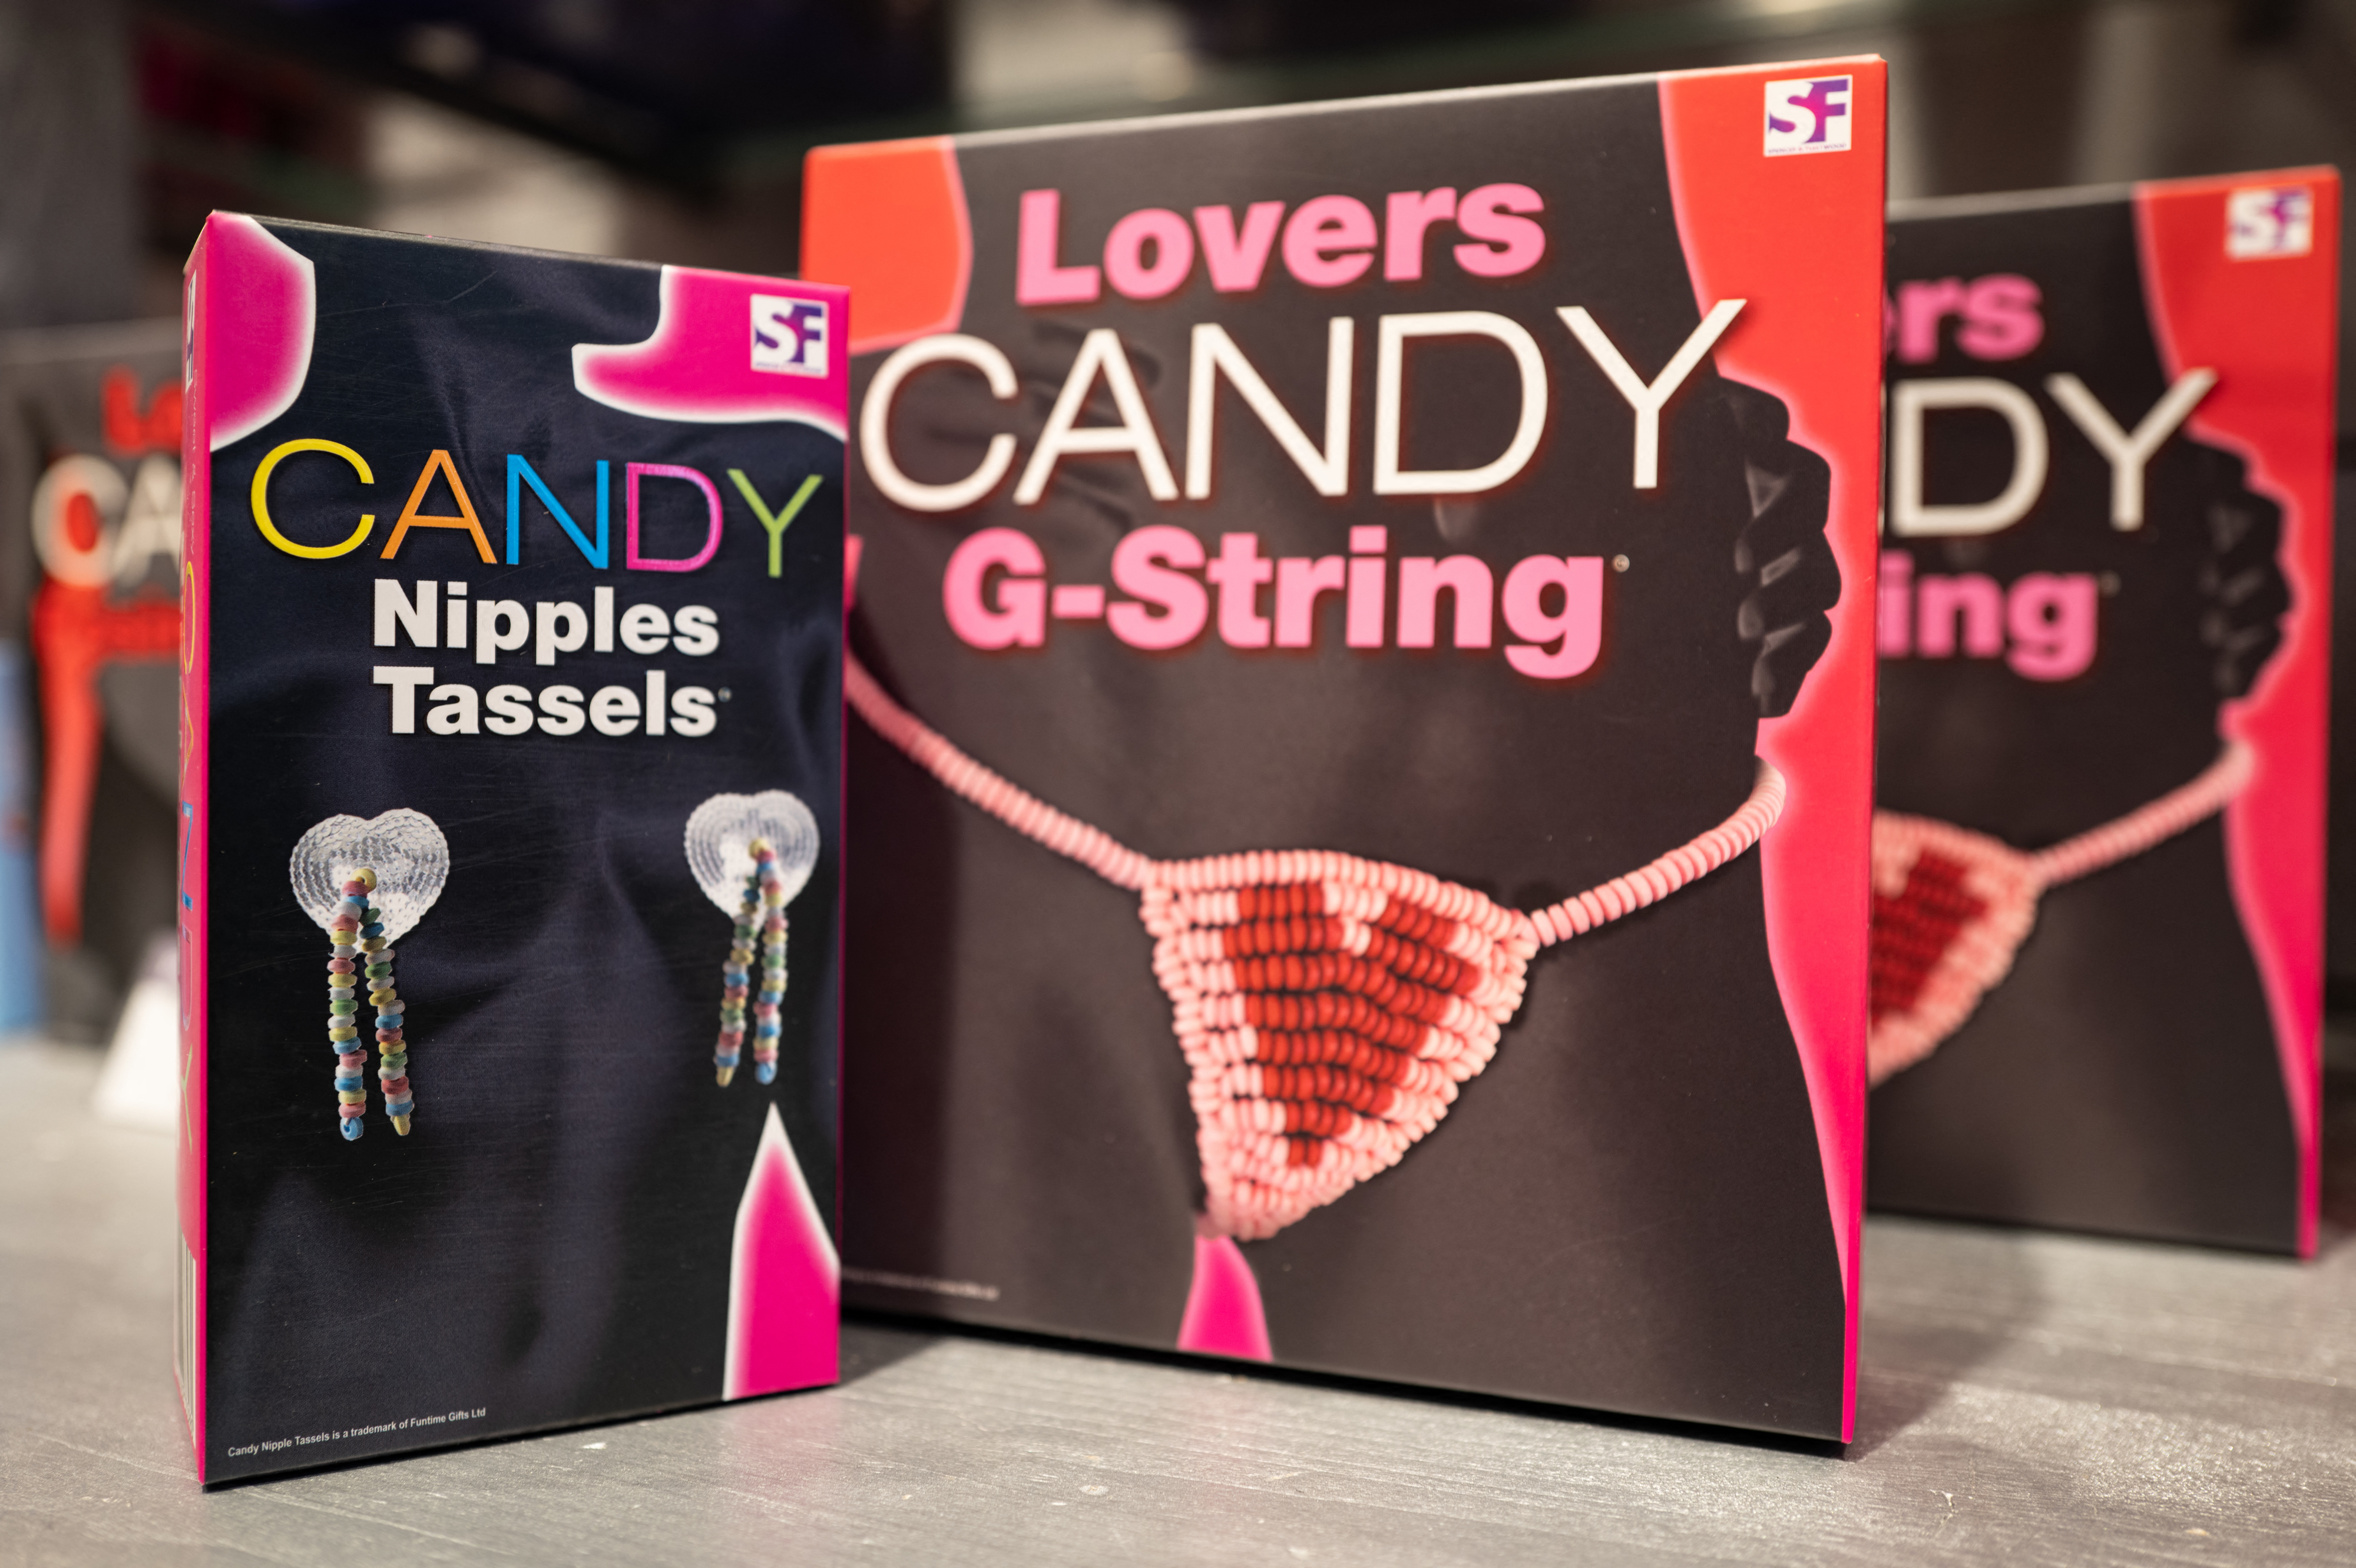 Product packaging for &quot;Lovers Candy G-String&quot; and &quot;Candy Nipples Tassels&quot; on display